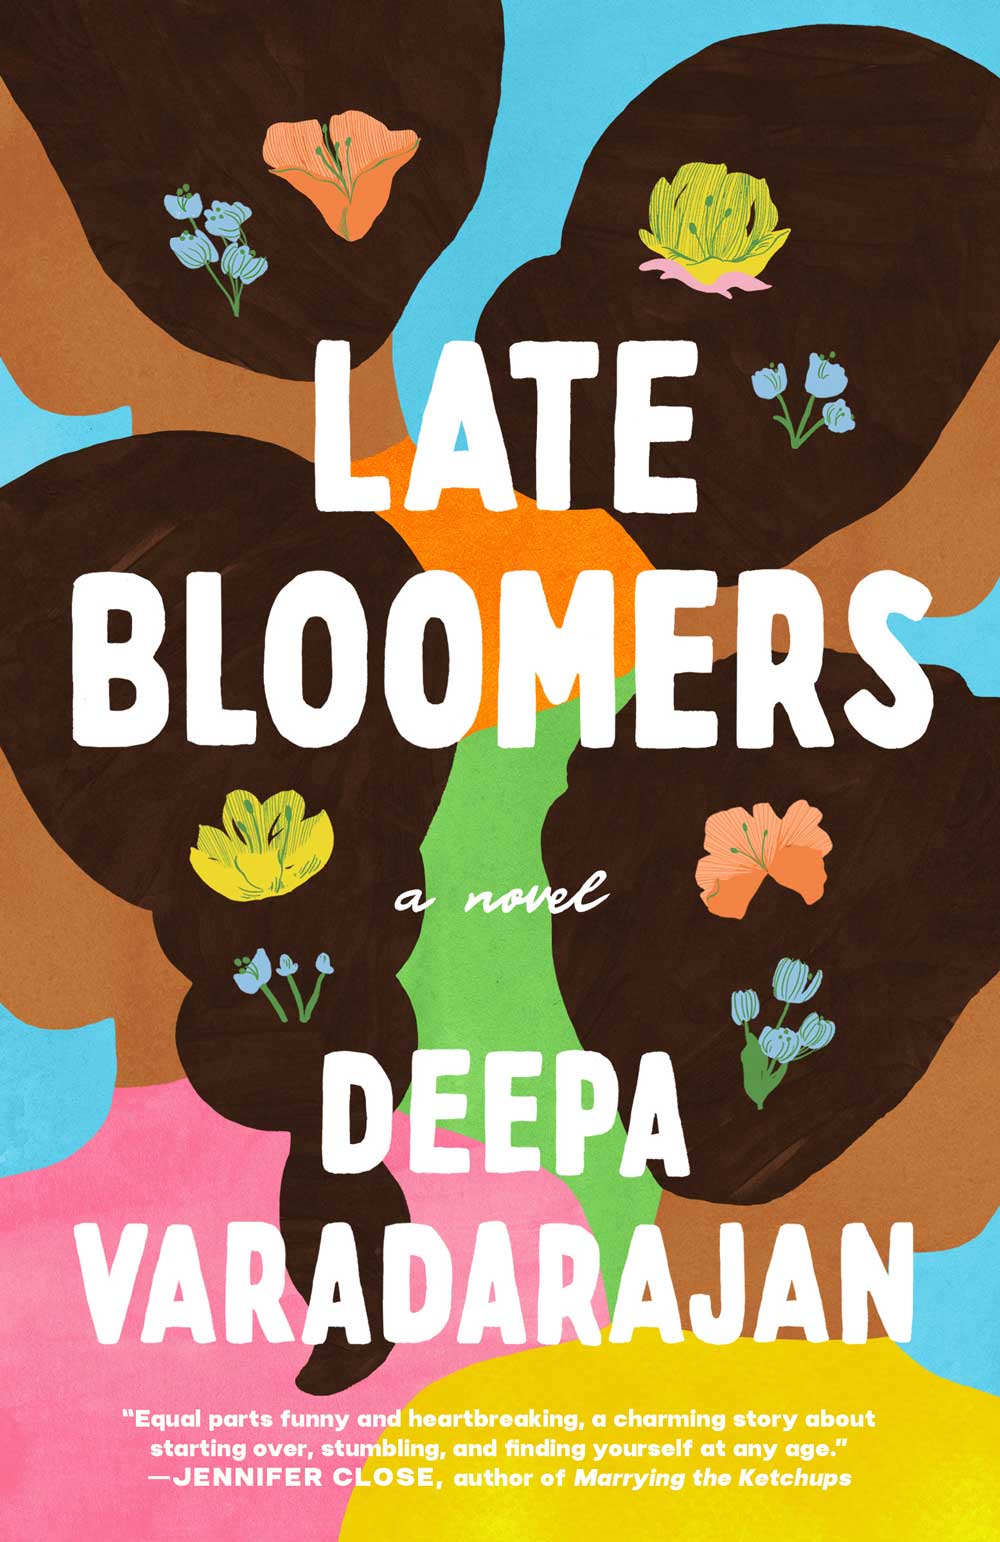 Book cover of Late Bloomers. Illustration of the backs of four peoples' heads with flowers in their hair.